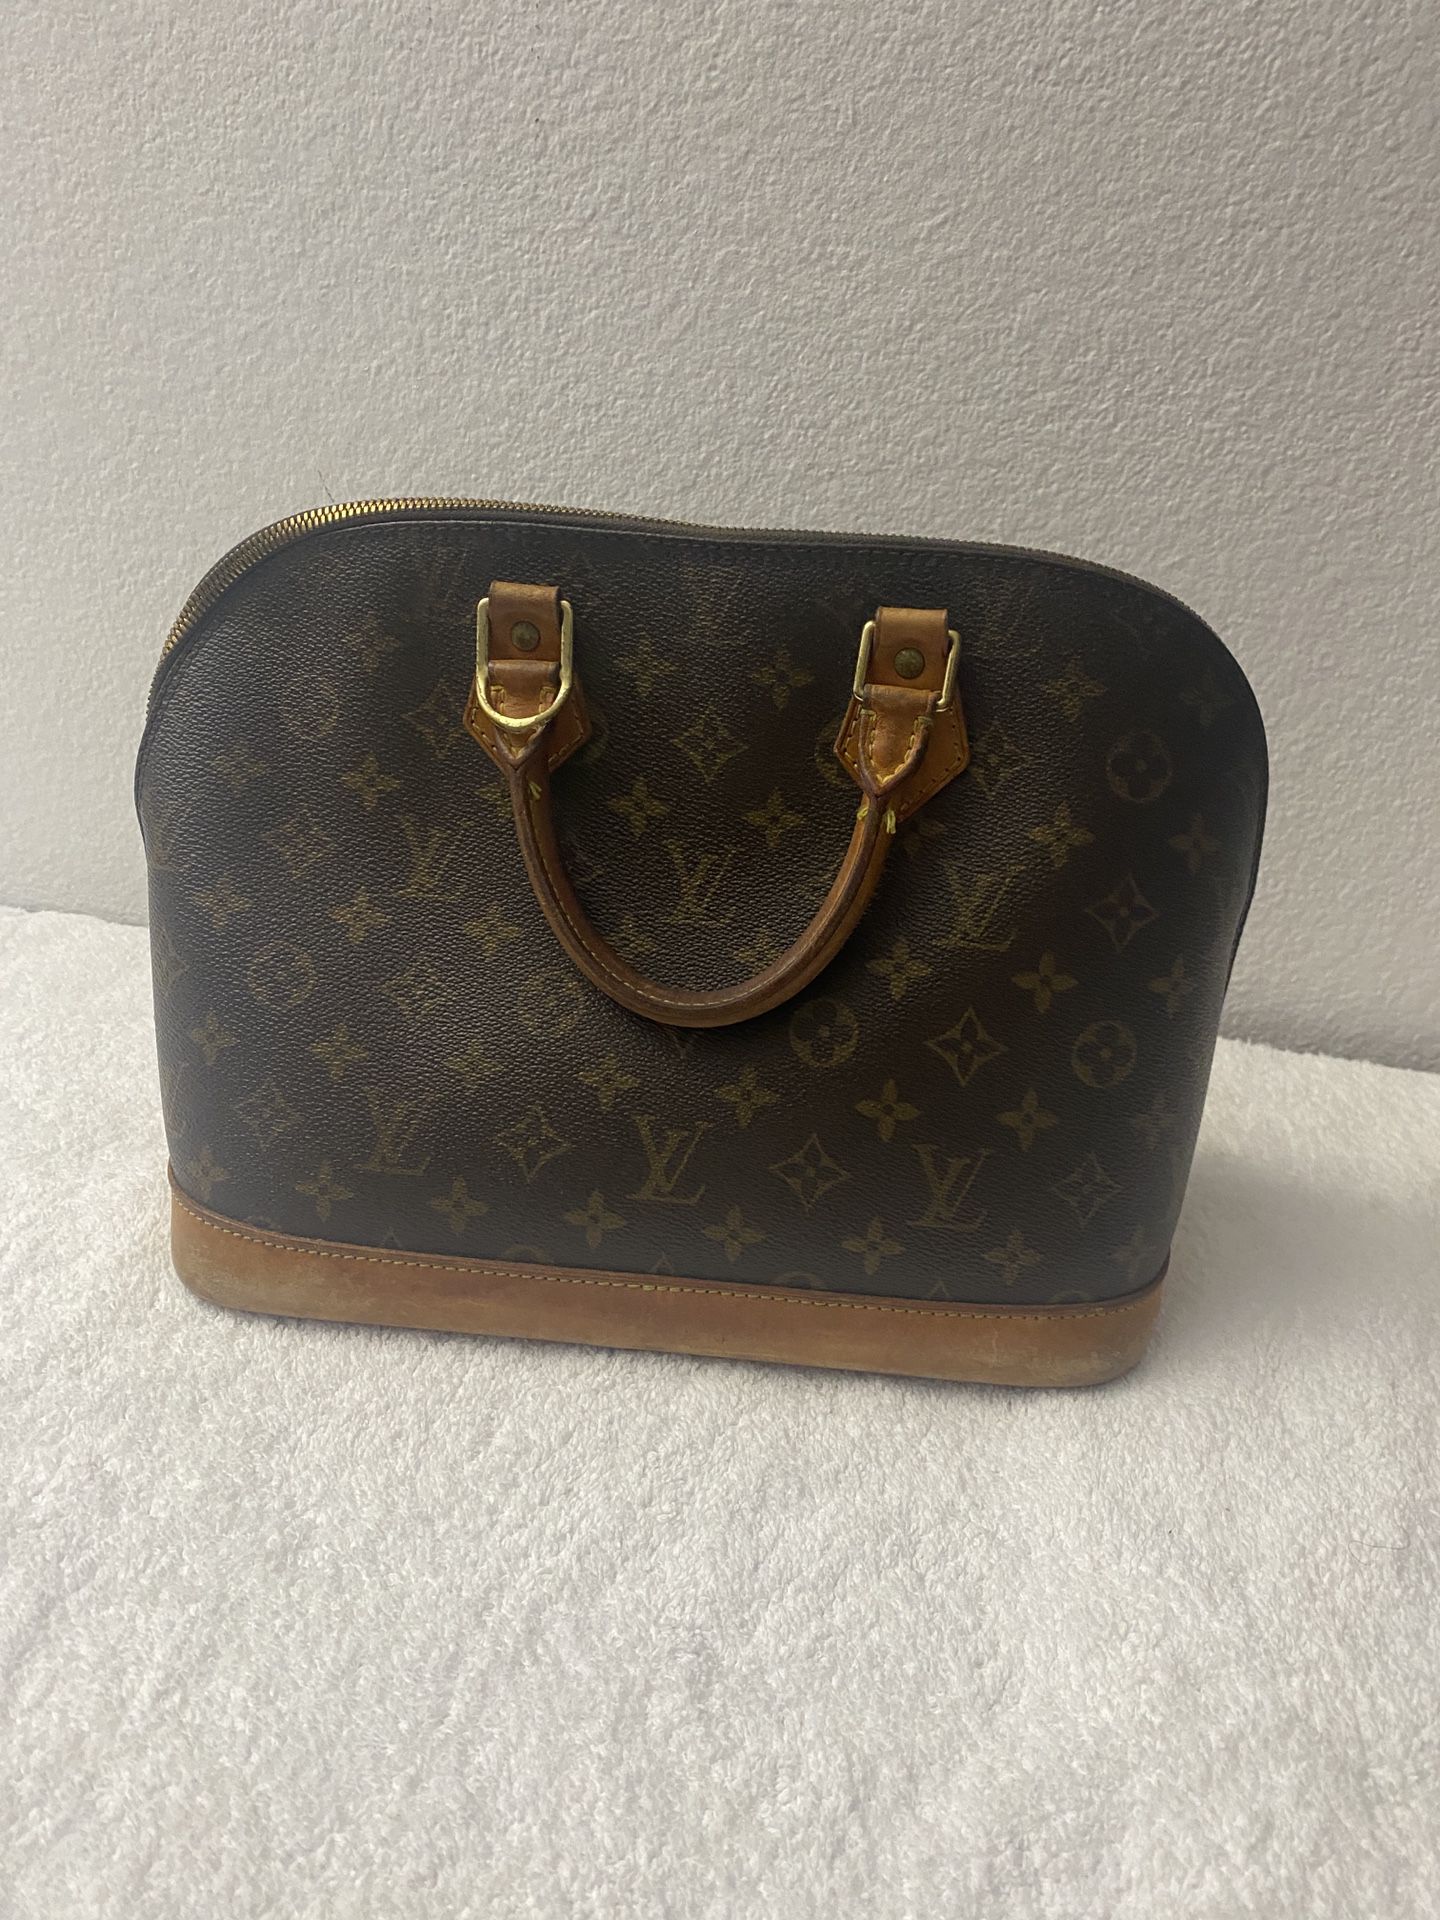 Louis Vuitton Alma BB Bags for Sale in Hawthorne, CA - OfferUp